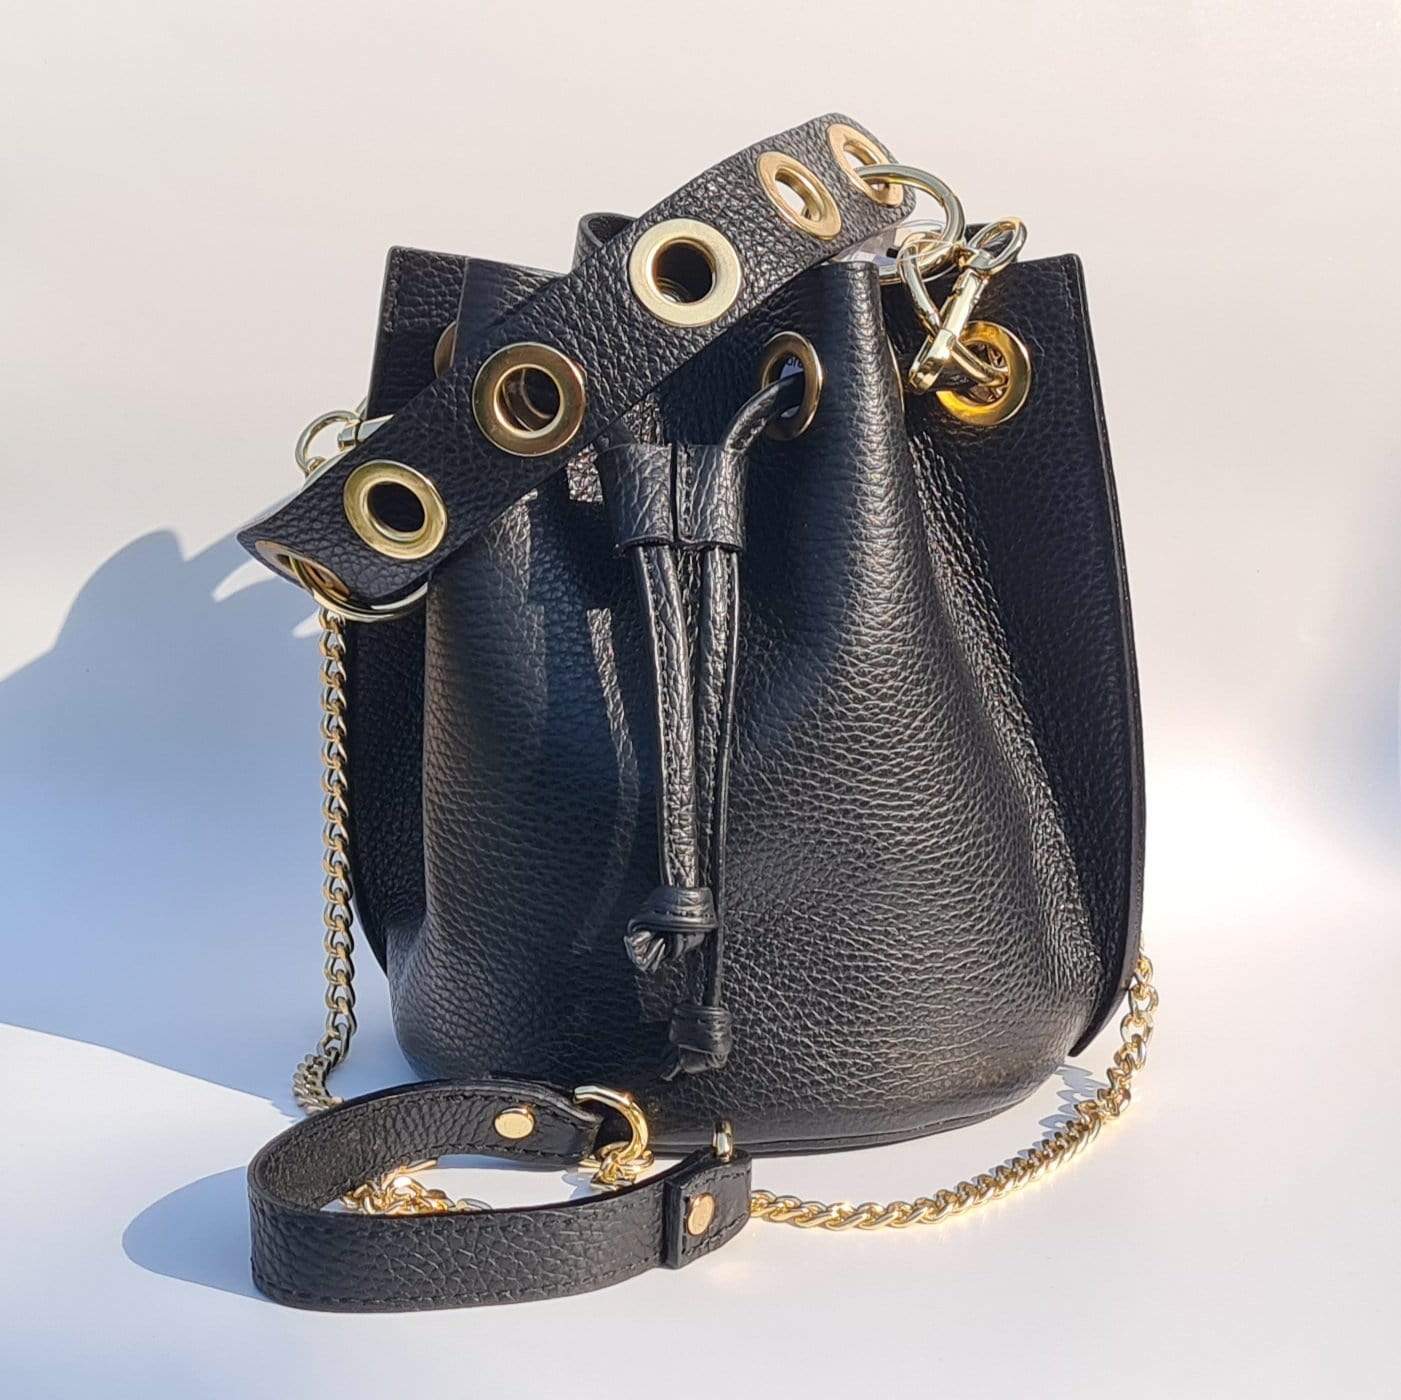 Black leather bucket bag with gold shoulder chain